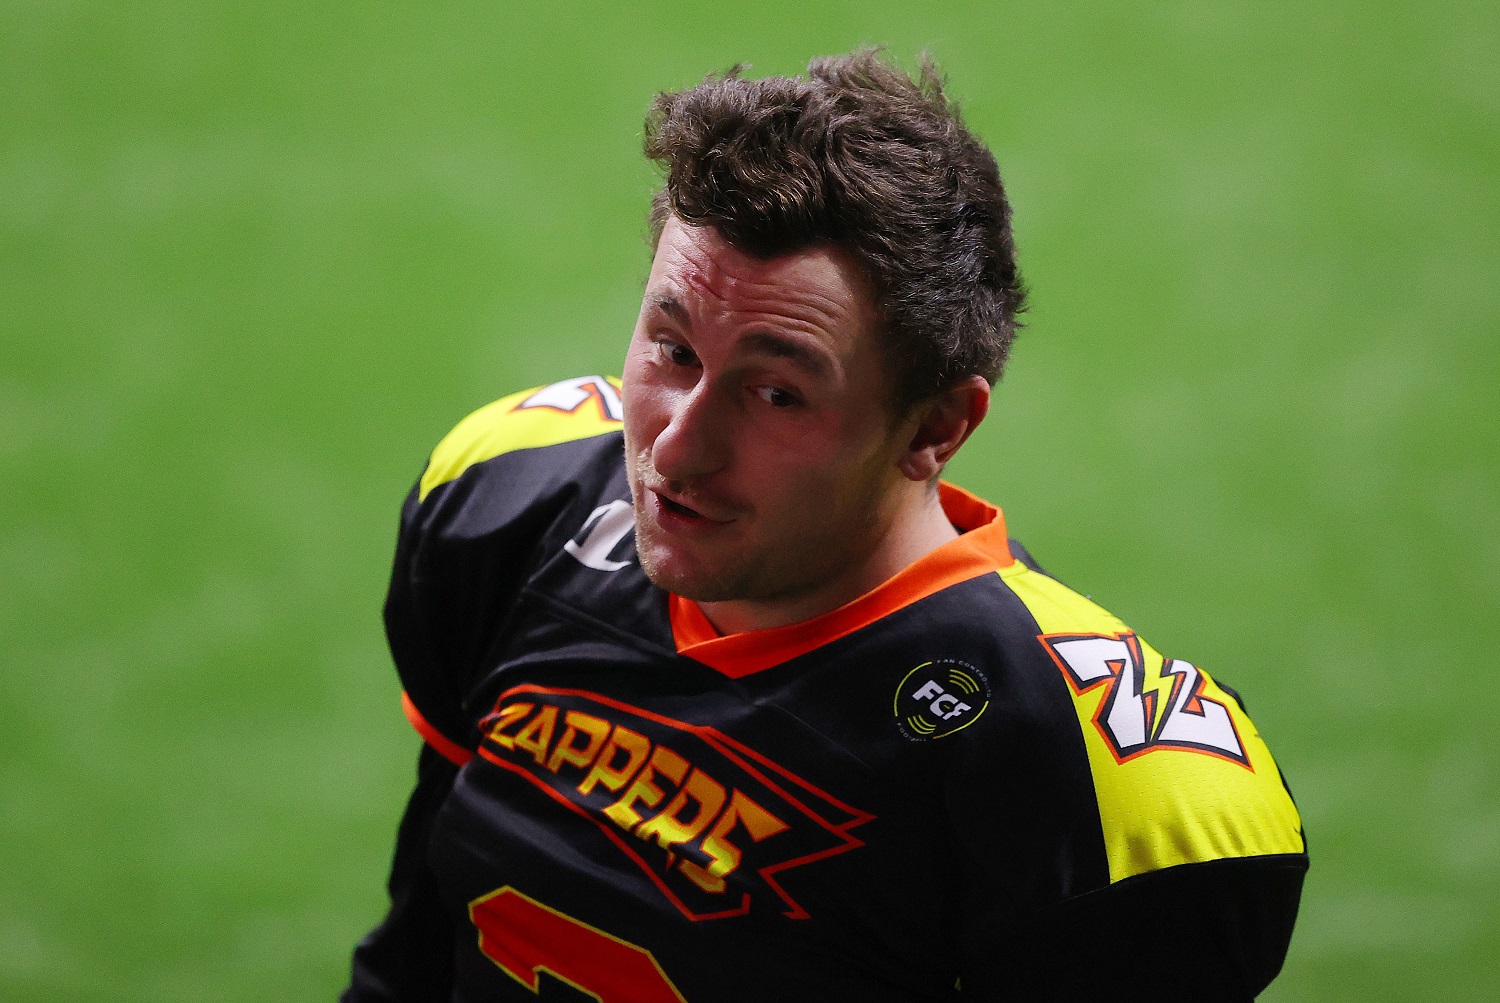 Johnny Manziel of the Zappers warms up before a Fan Controlled Football game at Infinite Energy Arena on Feb. 20, 2021, in Duluth, Georgia. | Kevin C. Cox/Fan Controlled Football/Getty Images